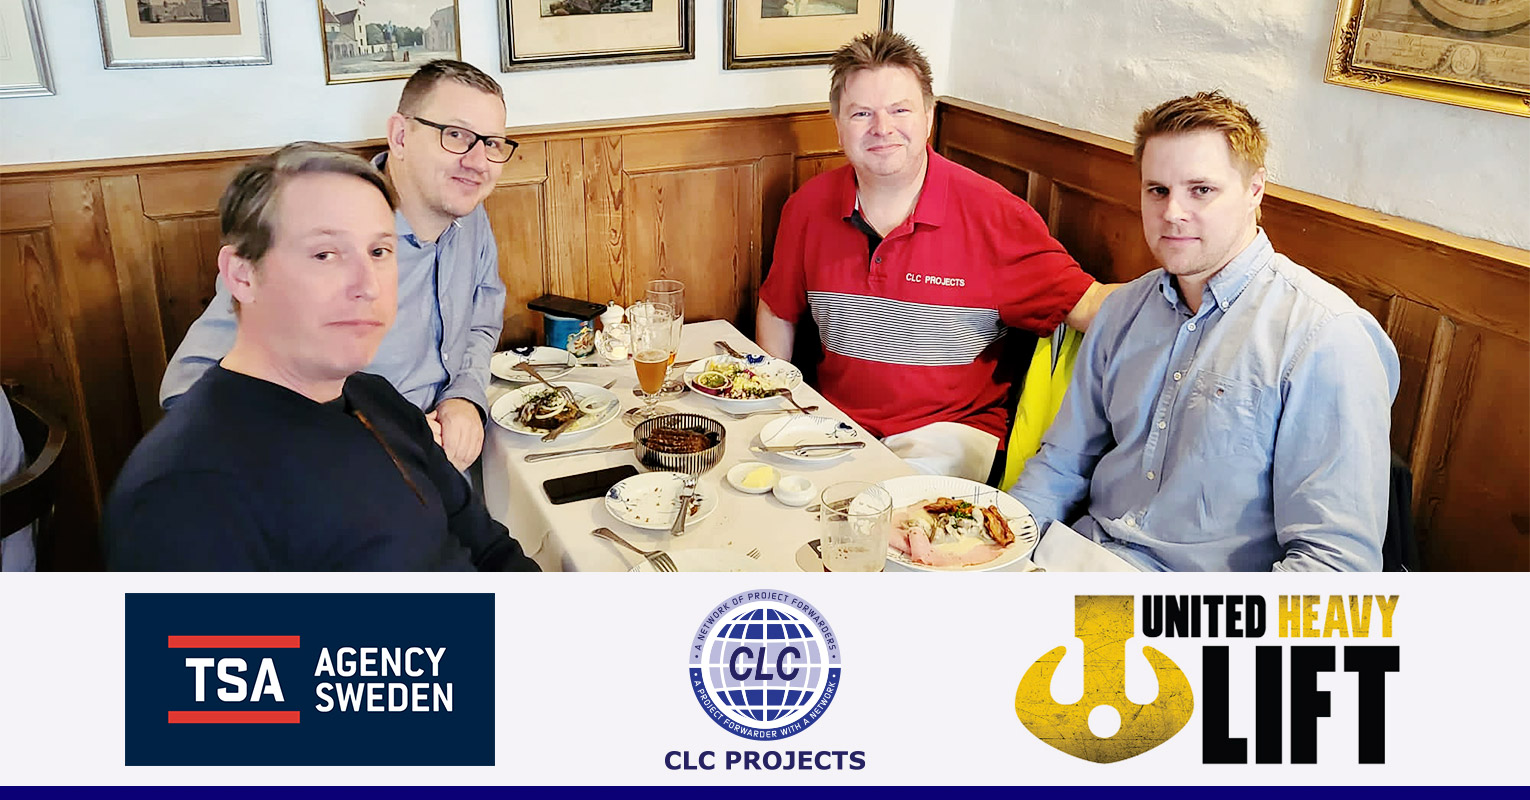 CLC Projects Chairman met with Mr. Lars Bonnesen & Mr. Christian Monsted of United Heavy Lift GmbH and Mr. Marcus Larsson of TSA Agency Sweden AB in Copenhagen